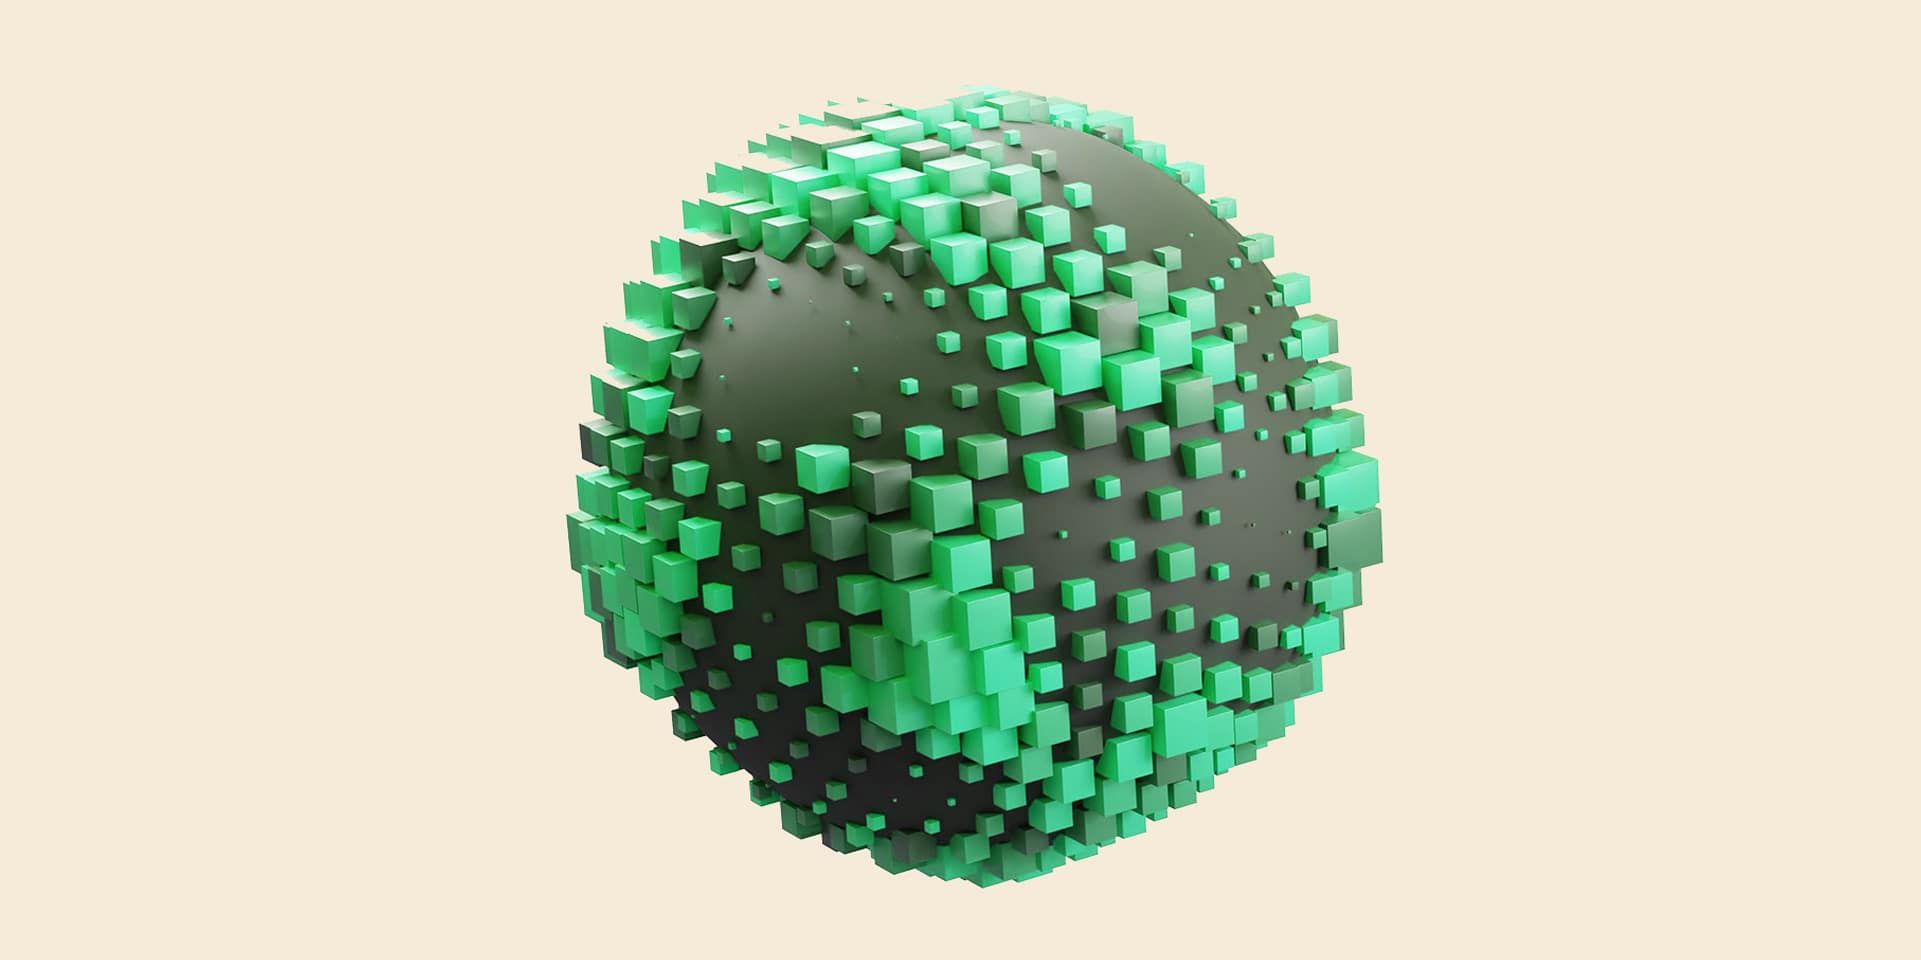 Sphere with green cubes across it